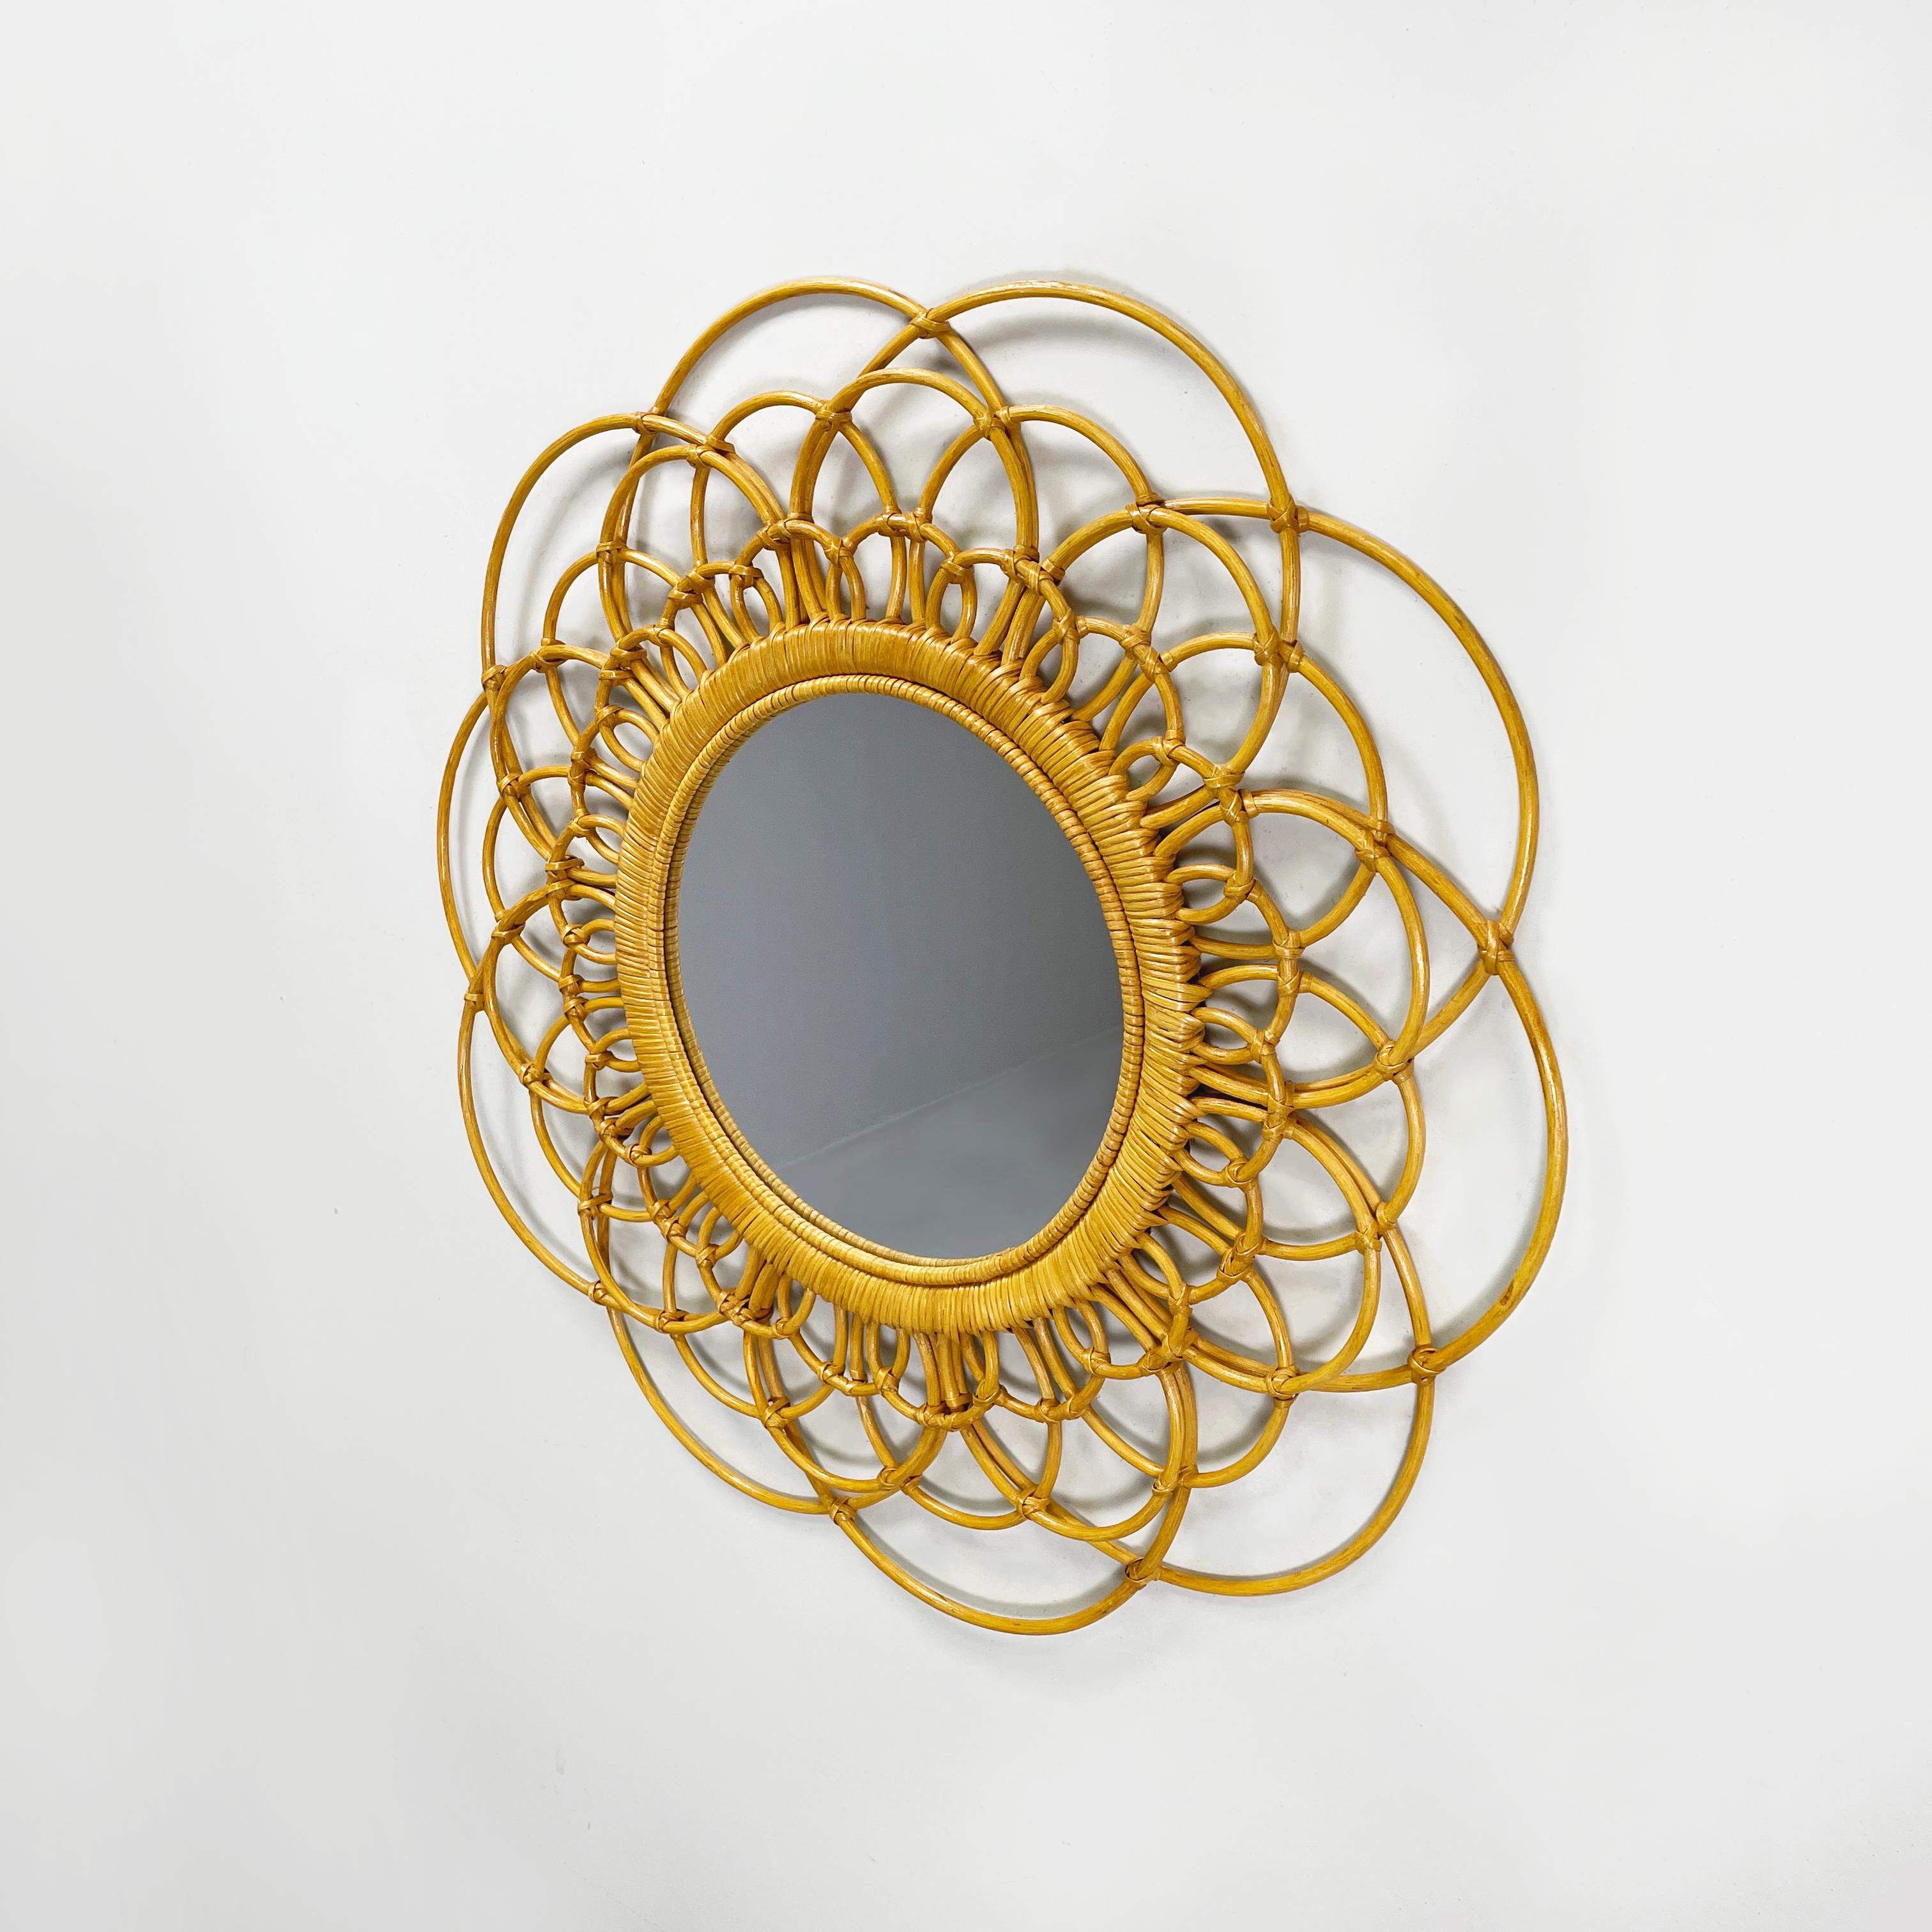 Italian mid-century modern Round rattan wall mirror with curved bamboo, 1960s
Round rattan wall mirror. The mirror frame is made up of a weave of rattan with arched curved and finely intertwined bamboo strips.
1960 approx.
Good condition, light